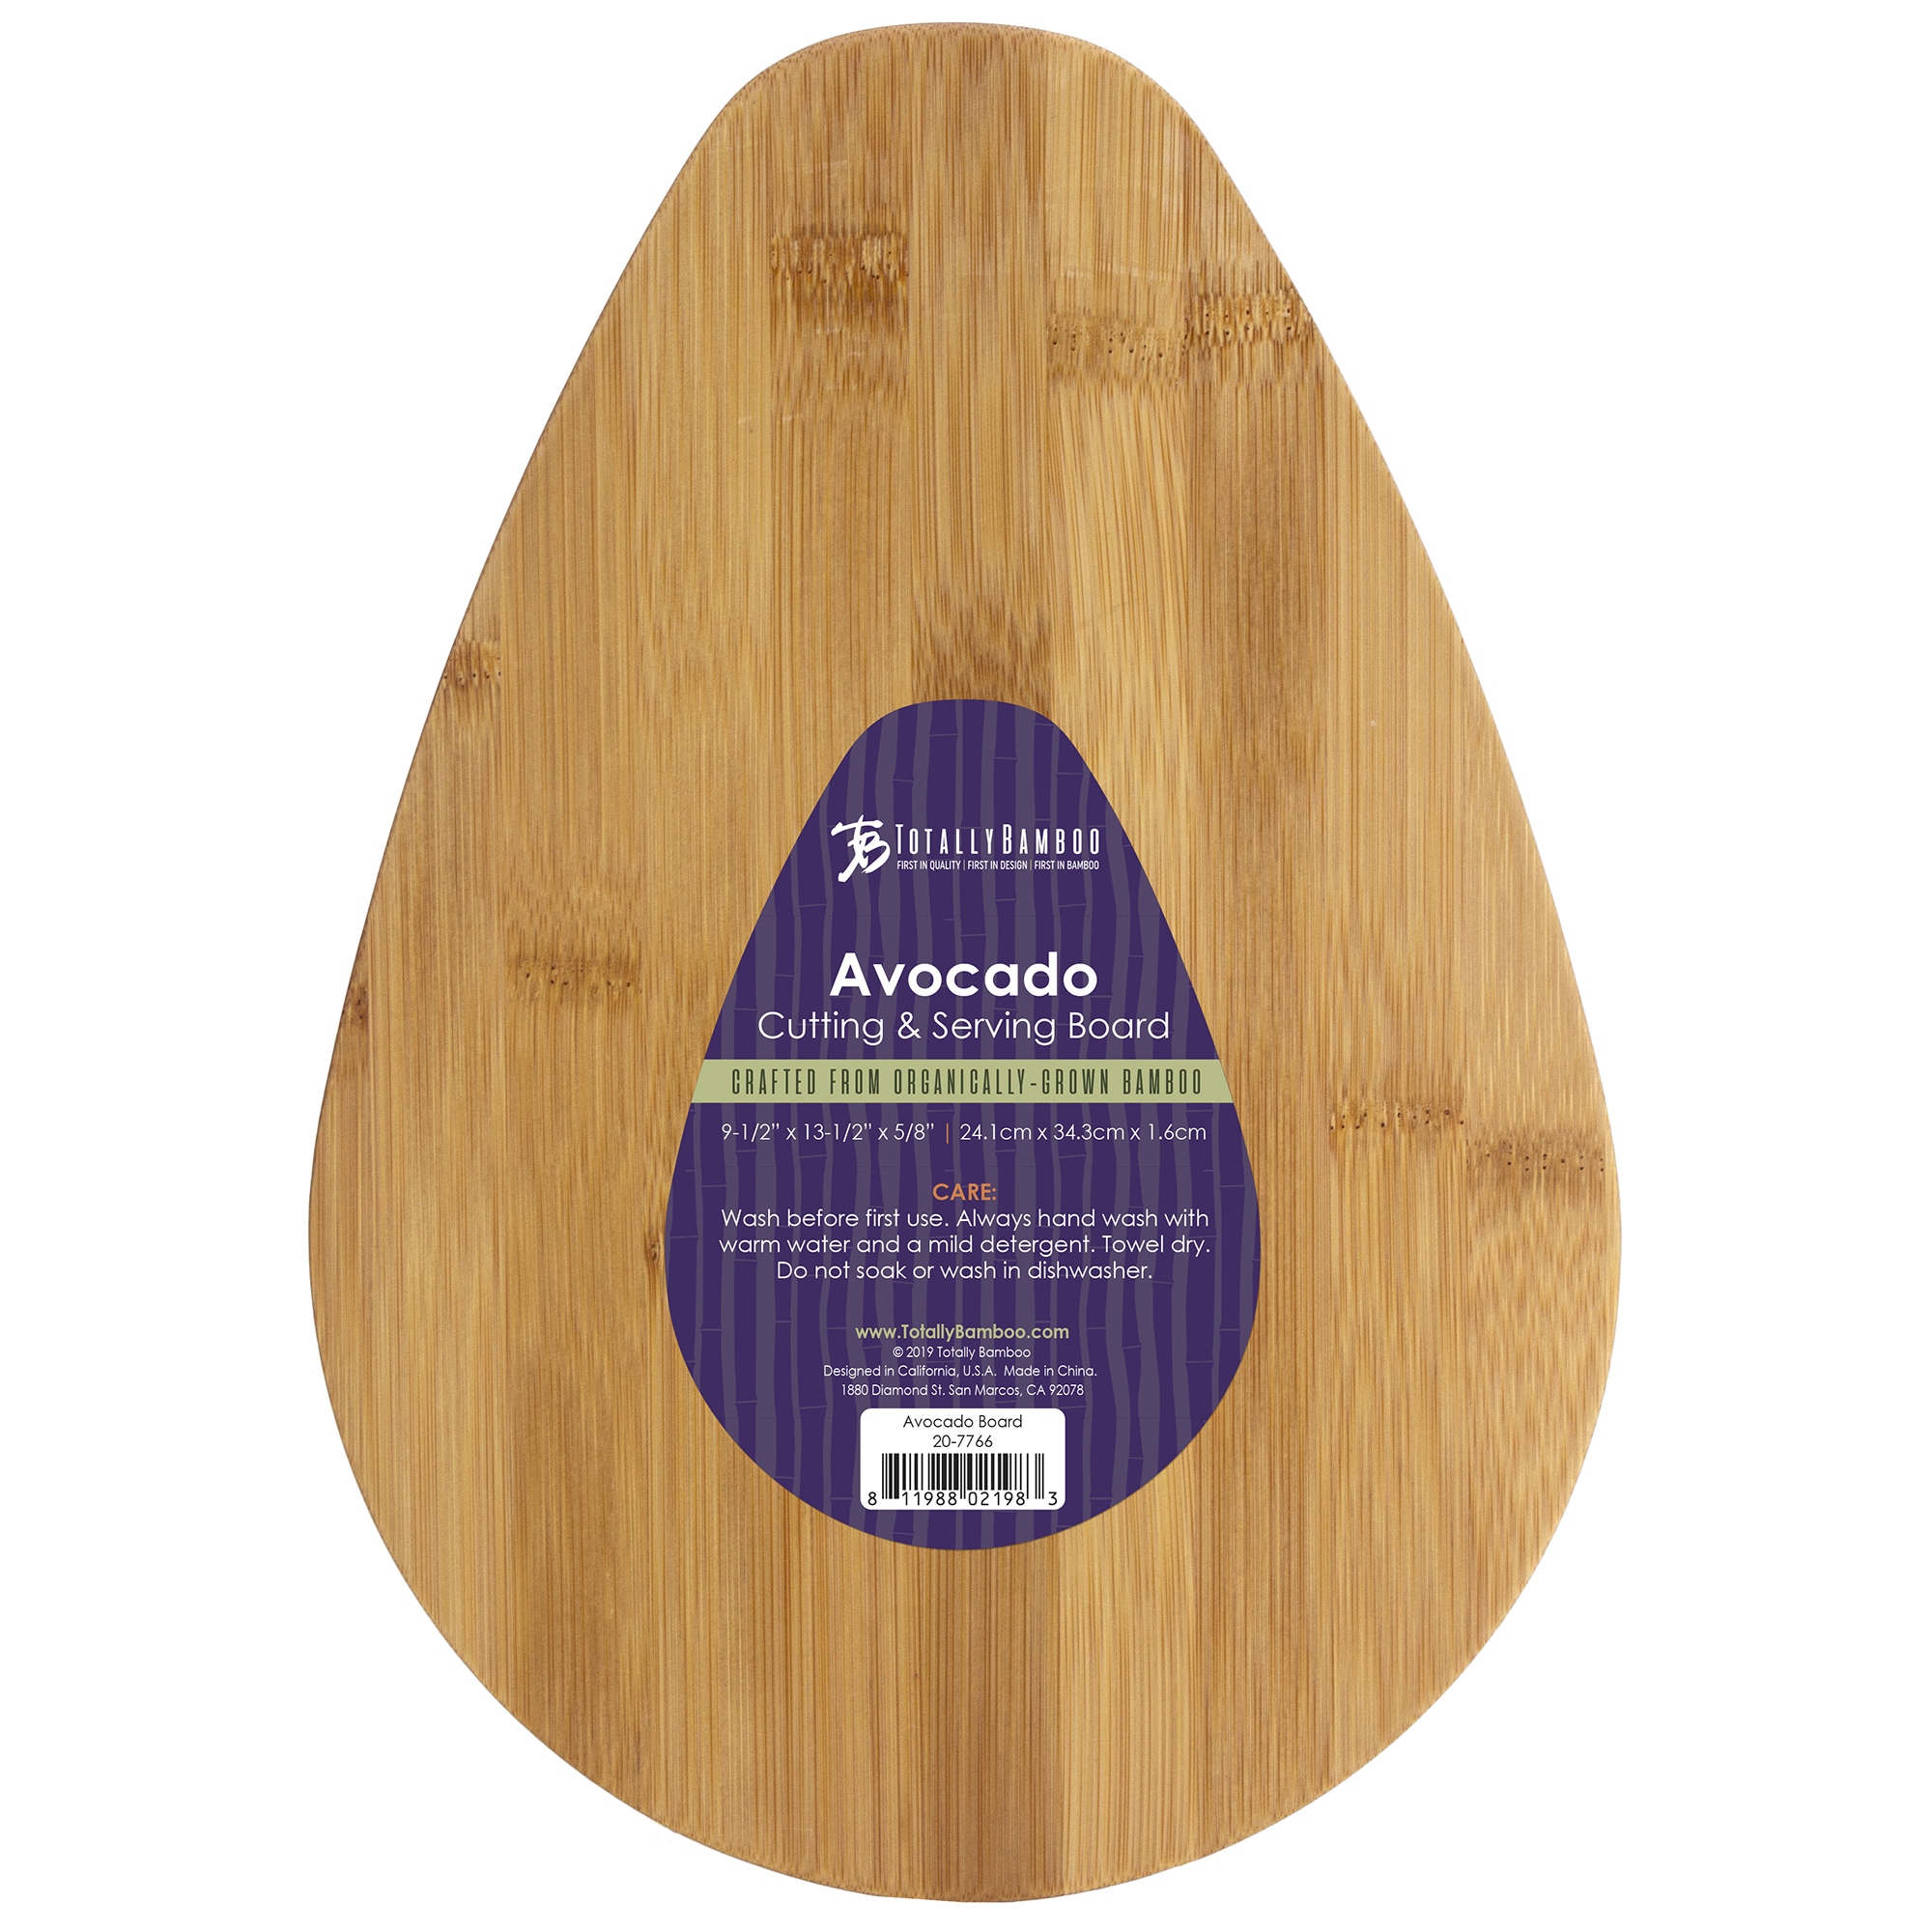 Totally Bamboo Avocado Obsession Eco-Friendly Serving and Cutting Board, Medium - image 5 of 5